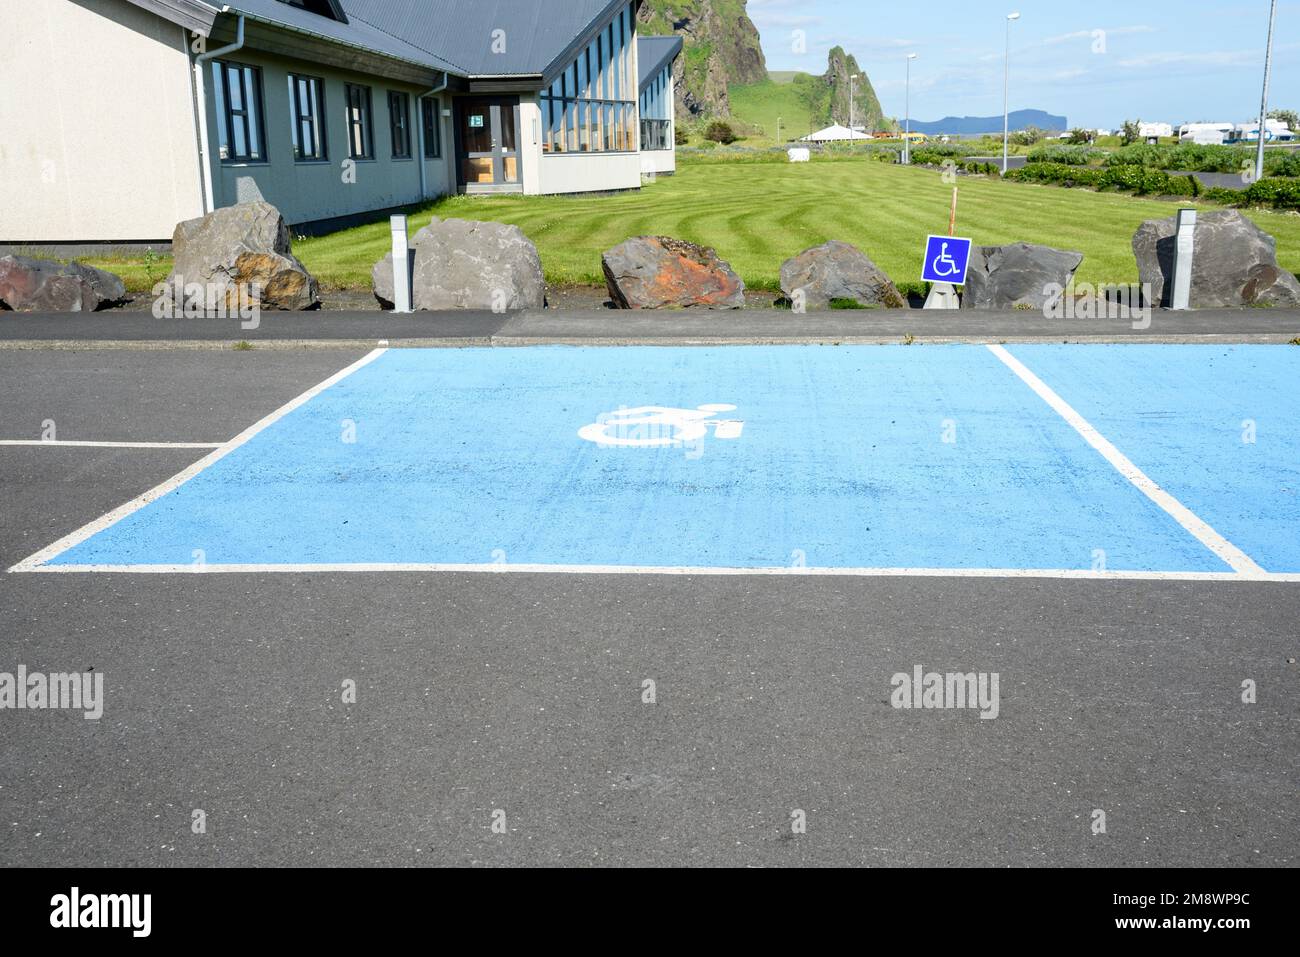 Parking space for disabled in a public parking on a sunny day Stock Photo